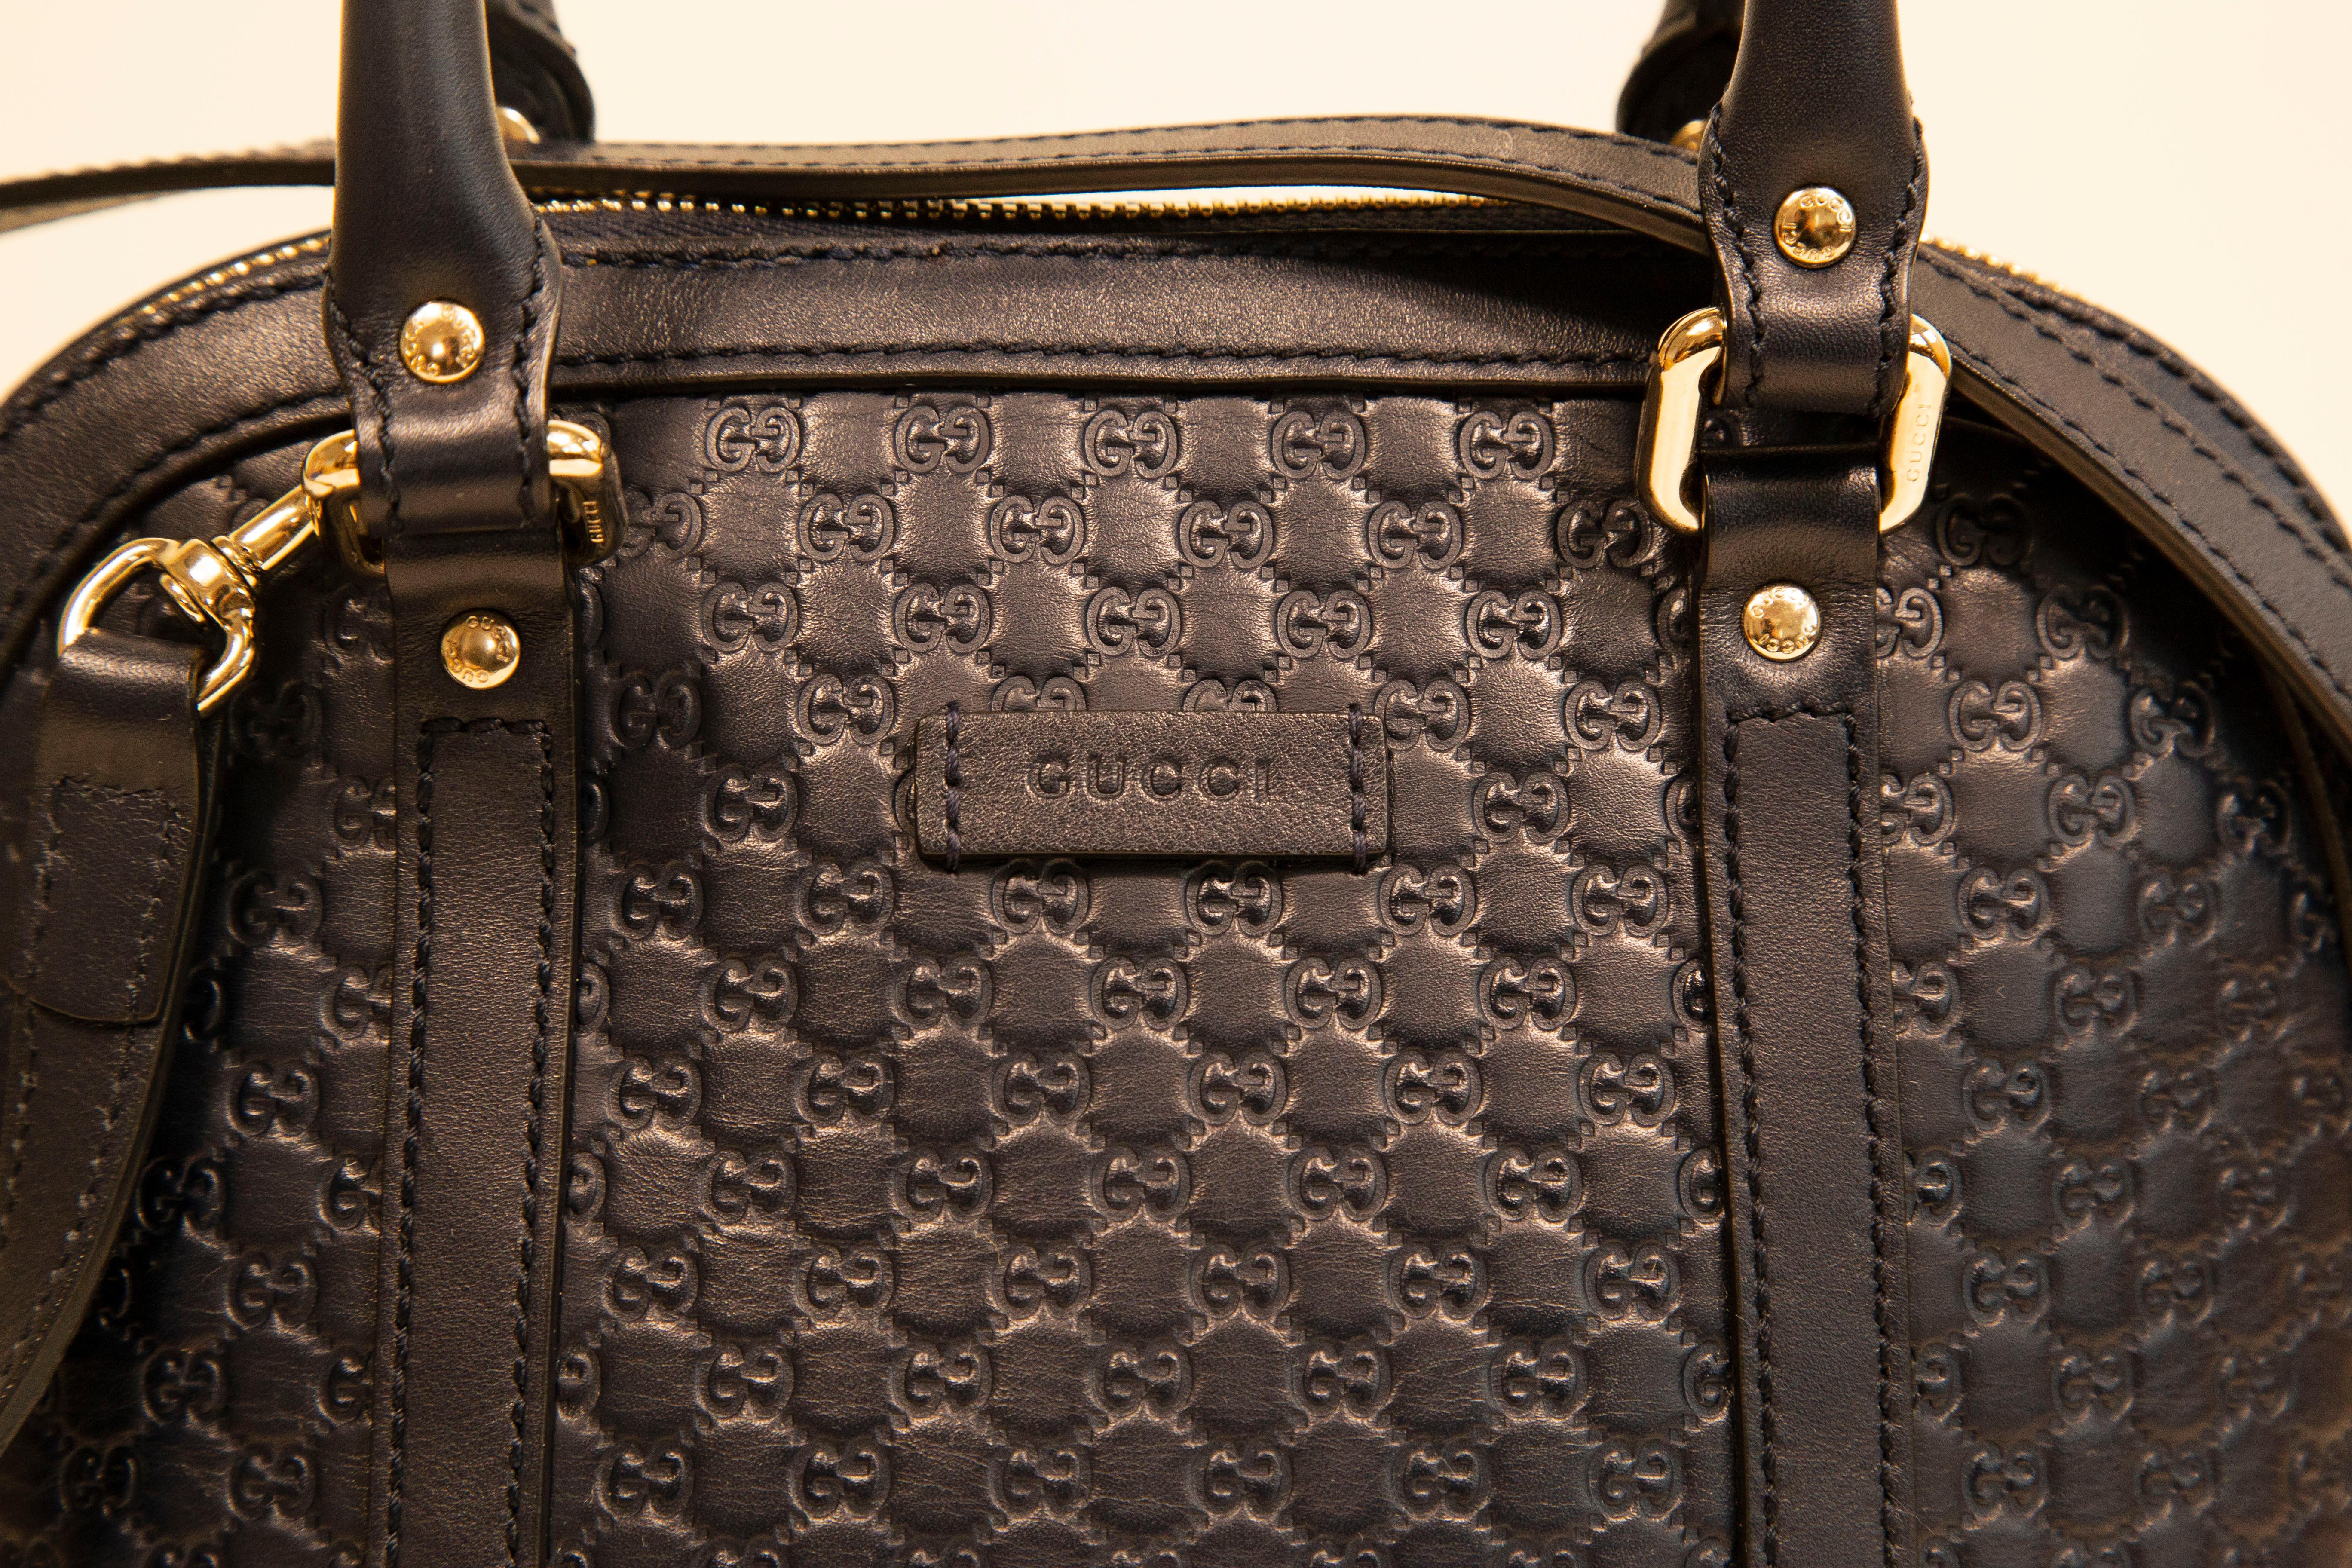 Gucci Dome Crossbody Bag Top Handle Bag in Navy Blue GG Embossed Leather   In Good Condition For Sale In Arnhem, NL